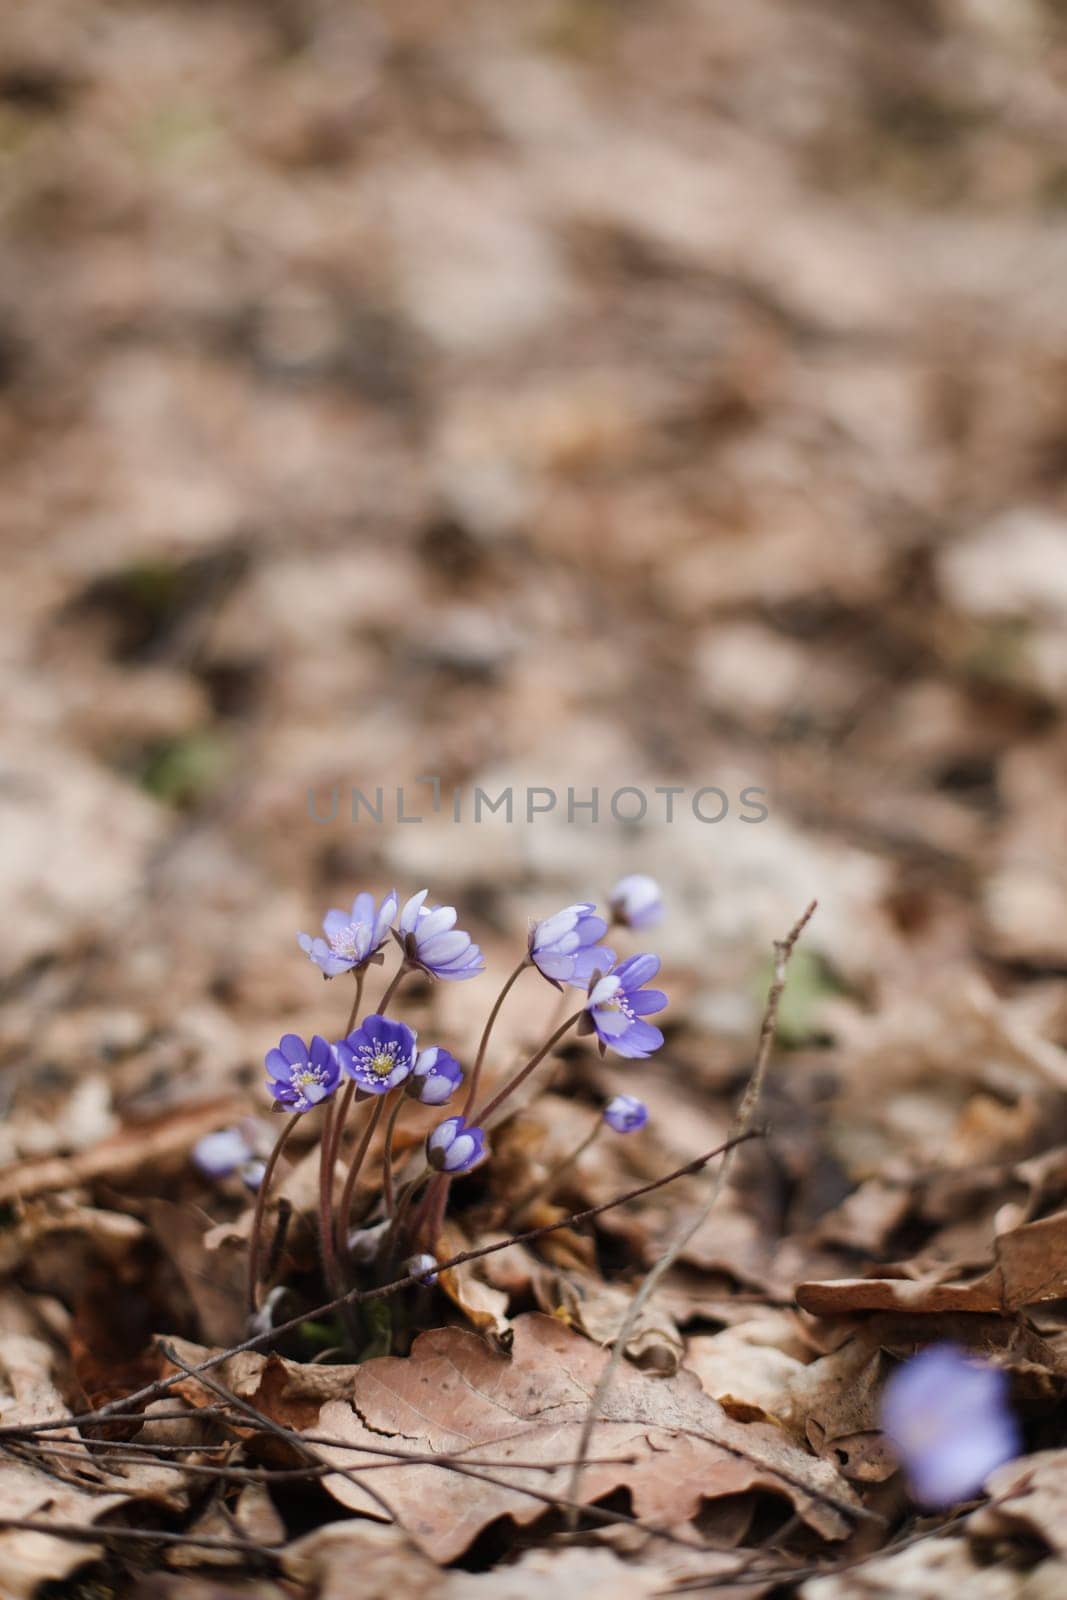 early spring flower crocus and snowdrops in natural environment, flower macro portrait